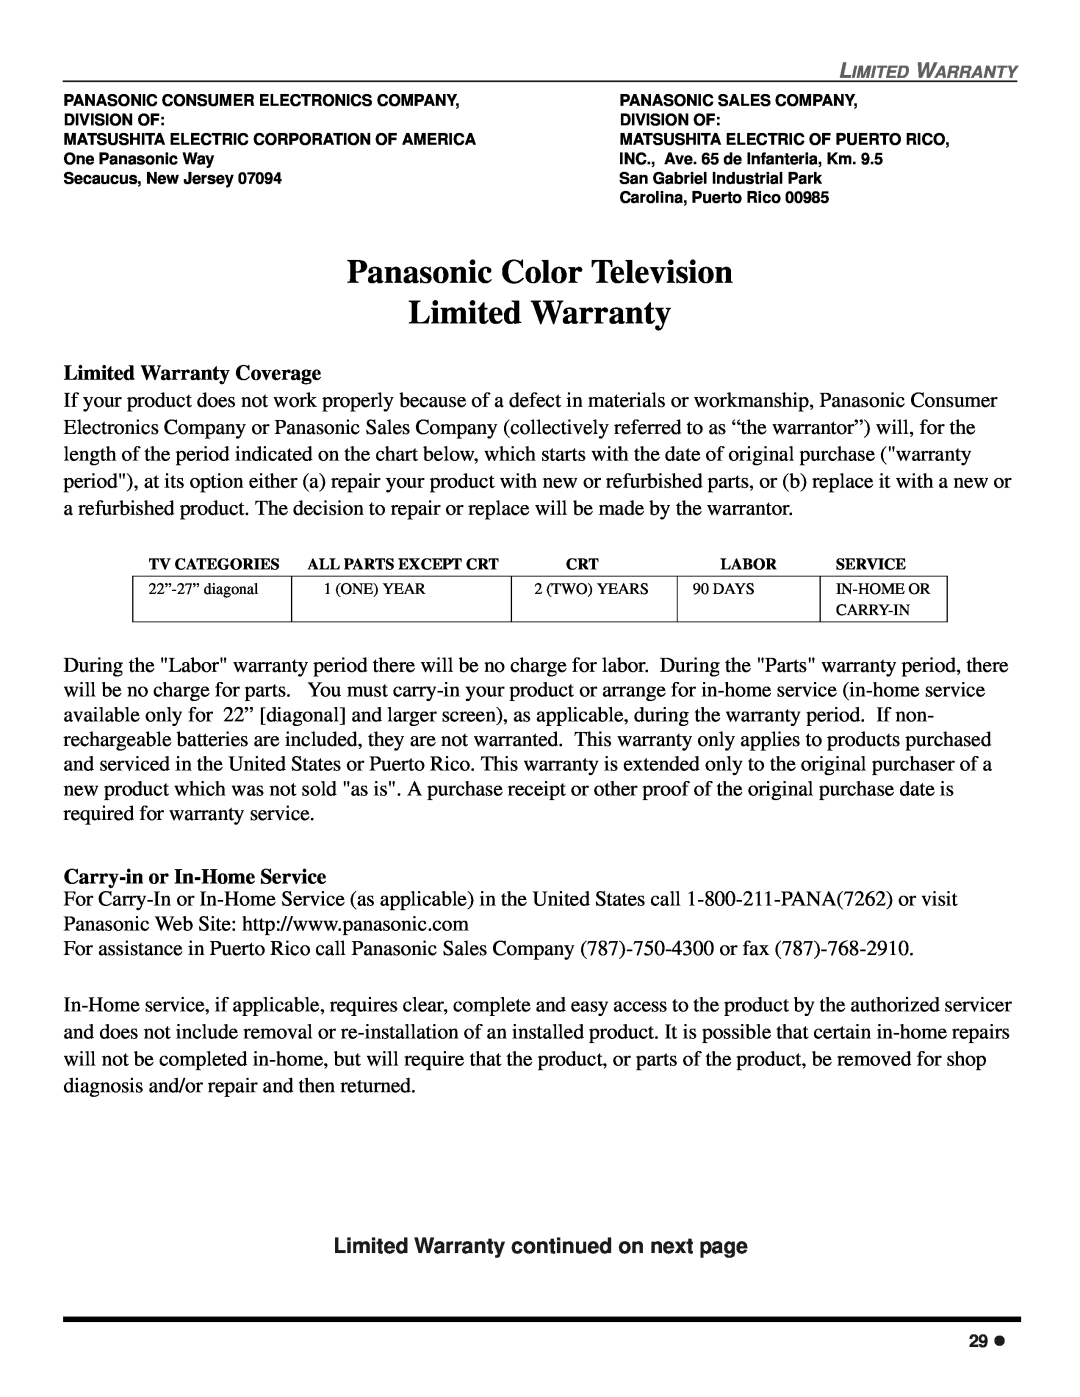 Panasonic CT 24SX12, CT 27SX12 Panasonic Color Television Limited Warranty, Limited Warranty continued on next page 